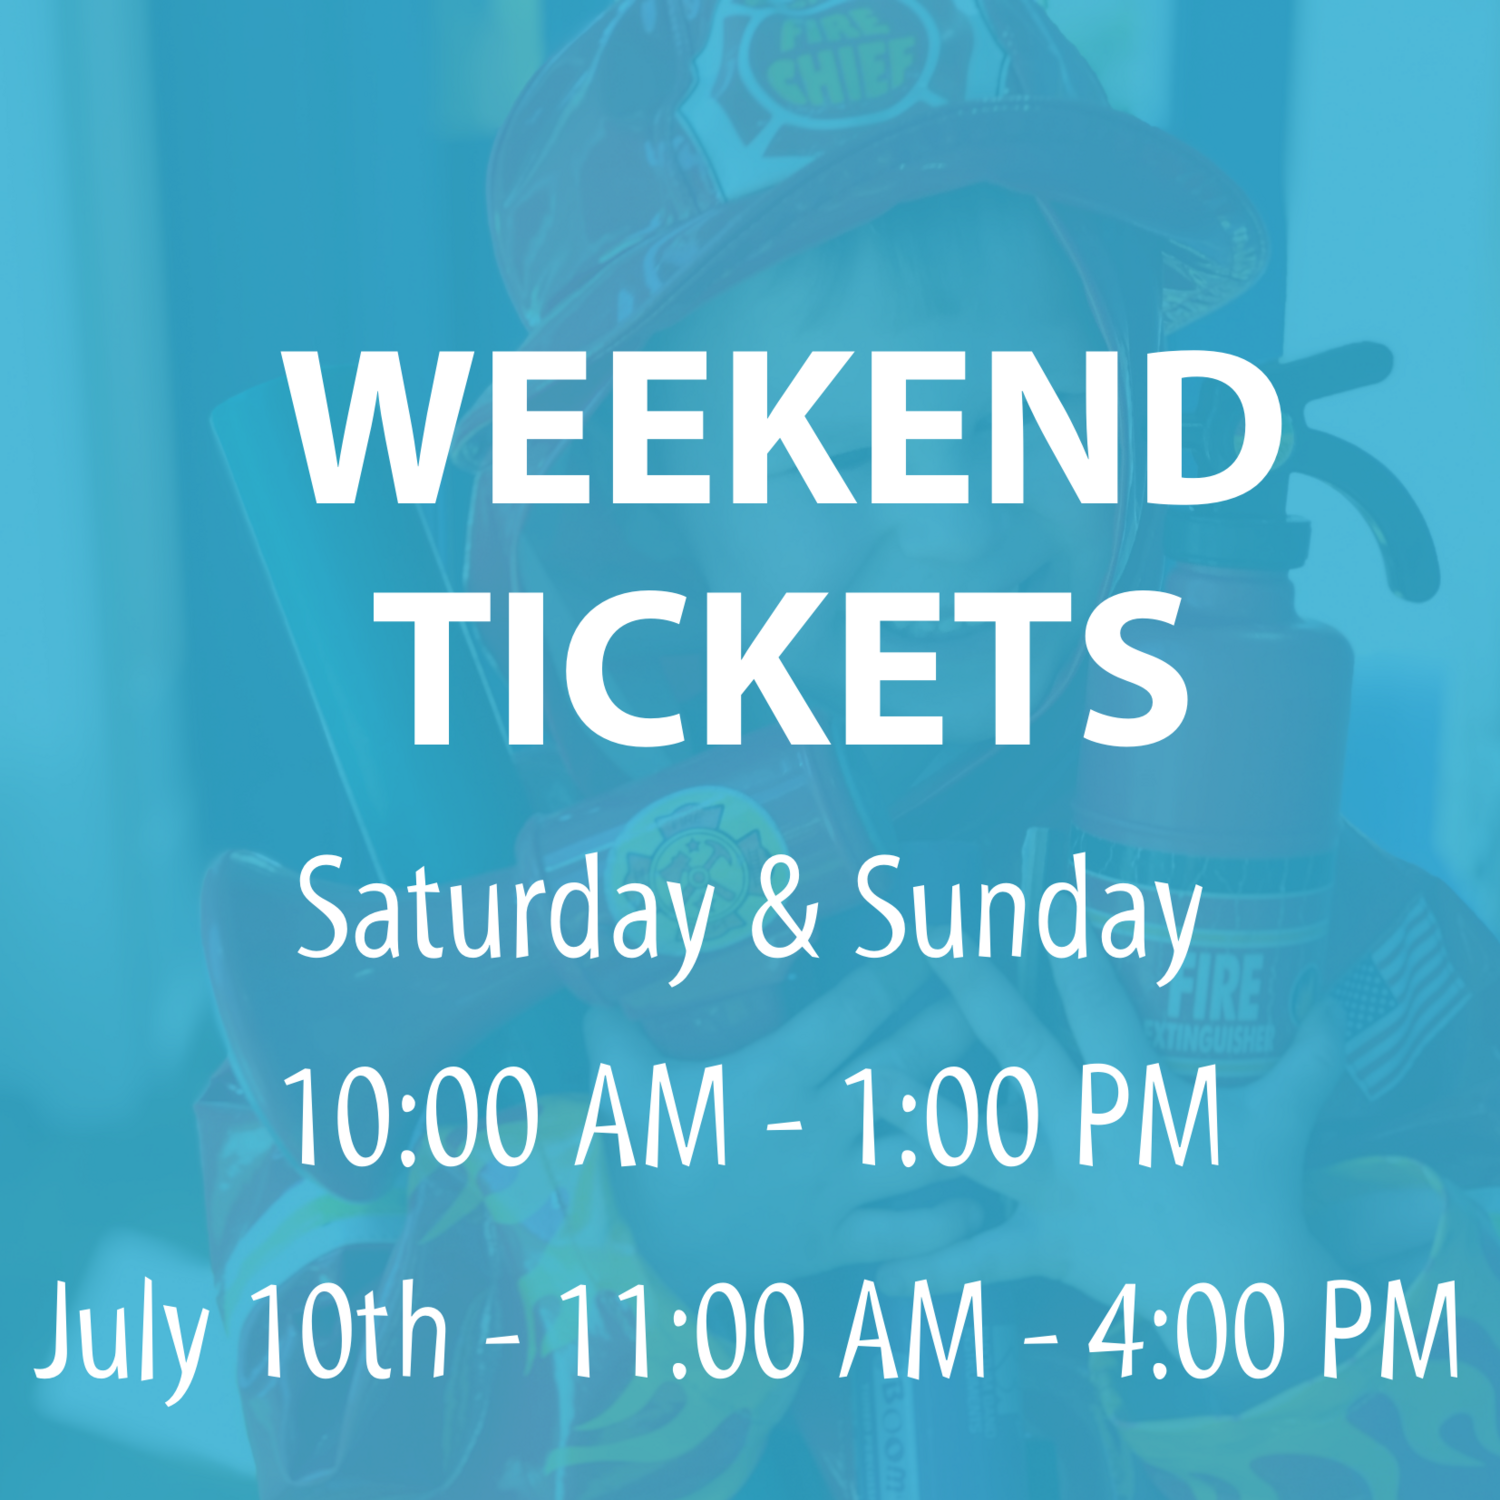 Weekend Admission Tickets (Saturday & Sunday)